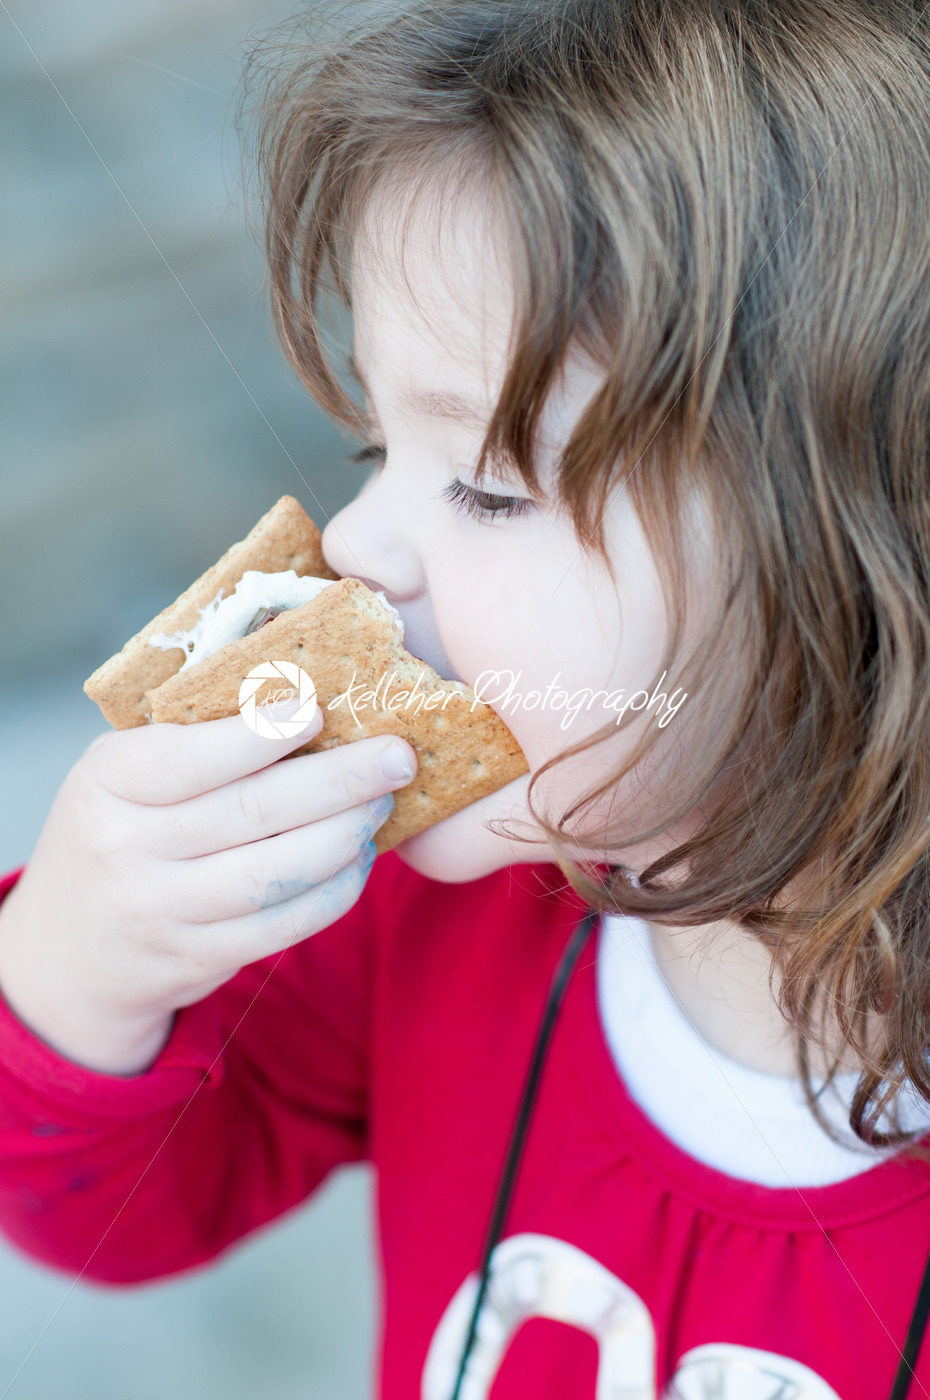 Young little girl is eating a s’more made from graham crackers, roasted marshmallows and chocolate. Her mouth is messy and she is taking a toothy bite of the s’more. - Kelleher Photography Store